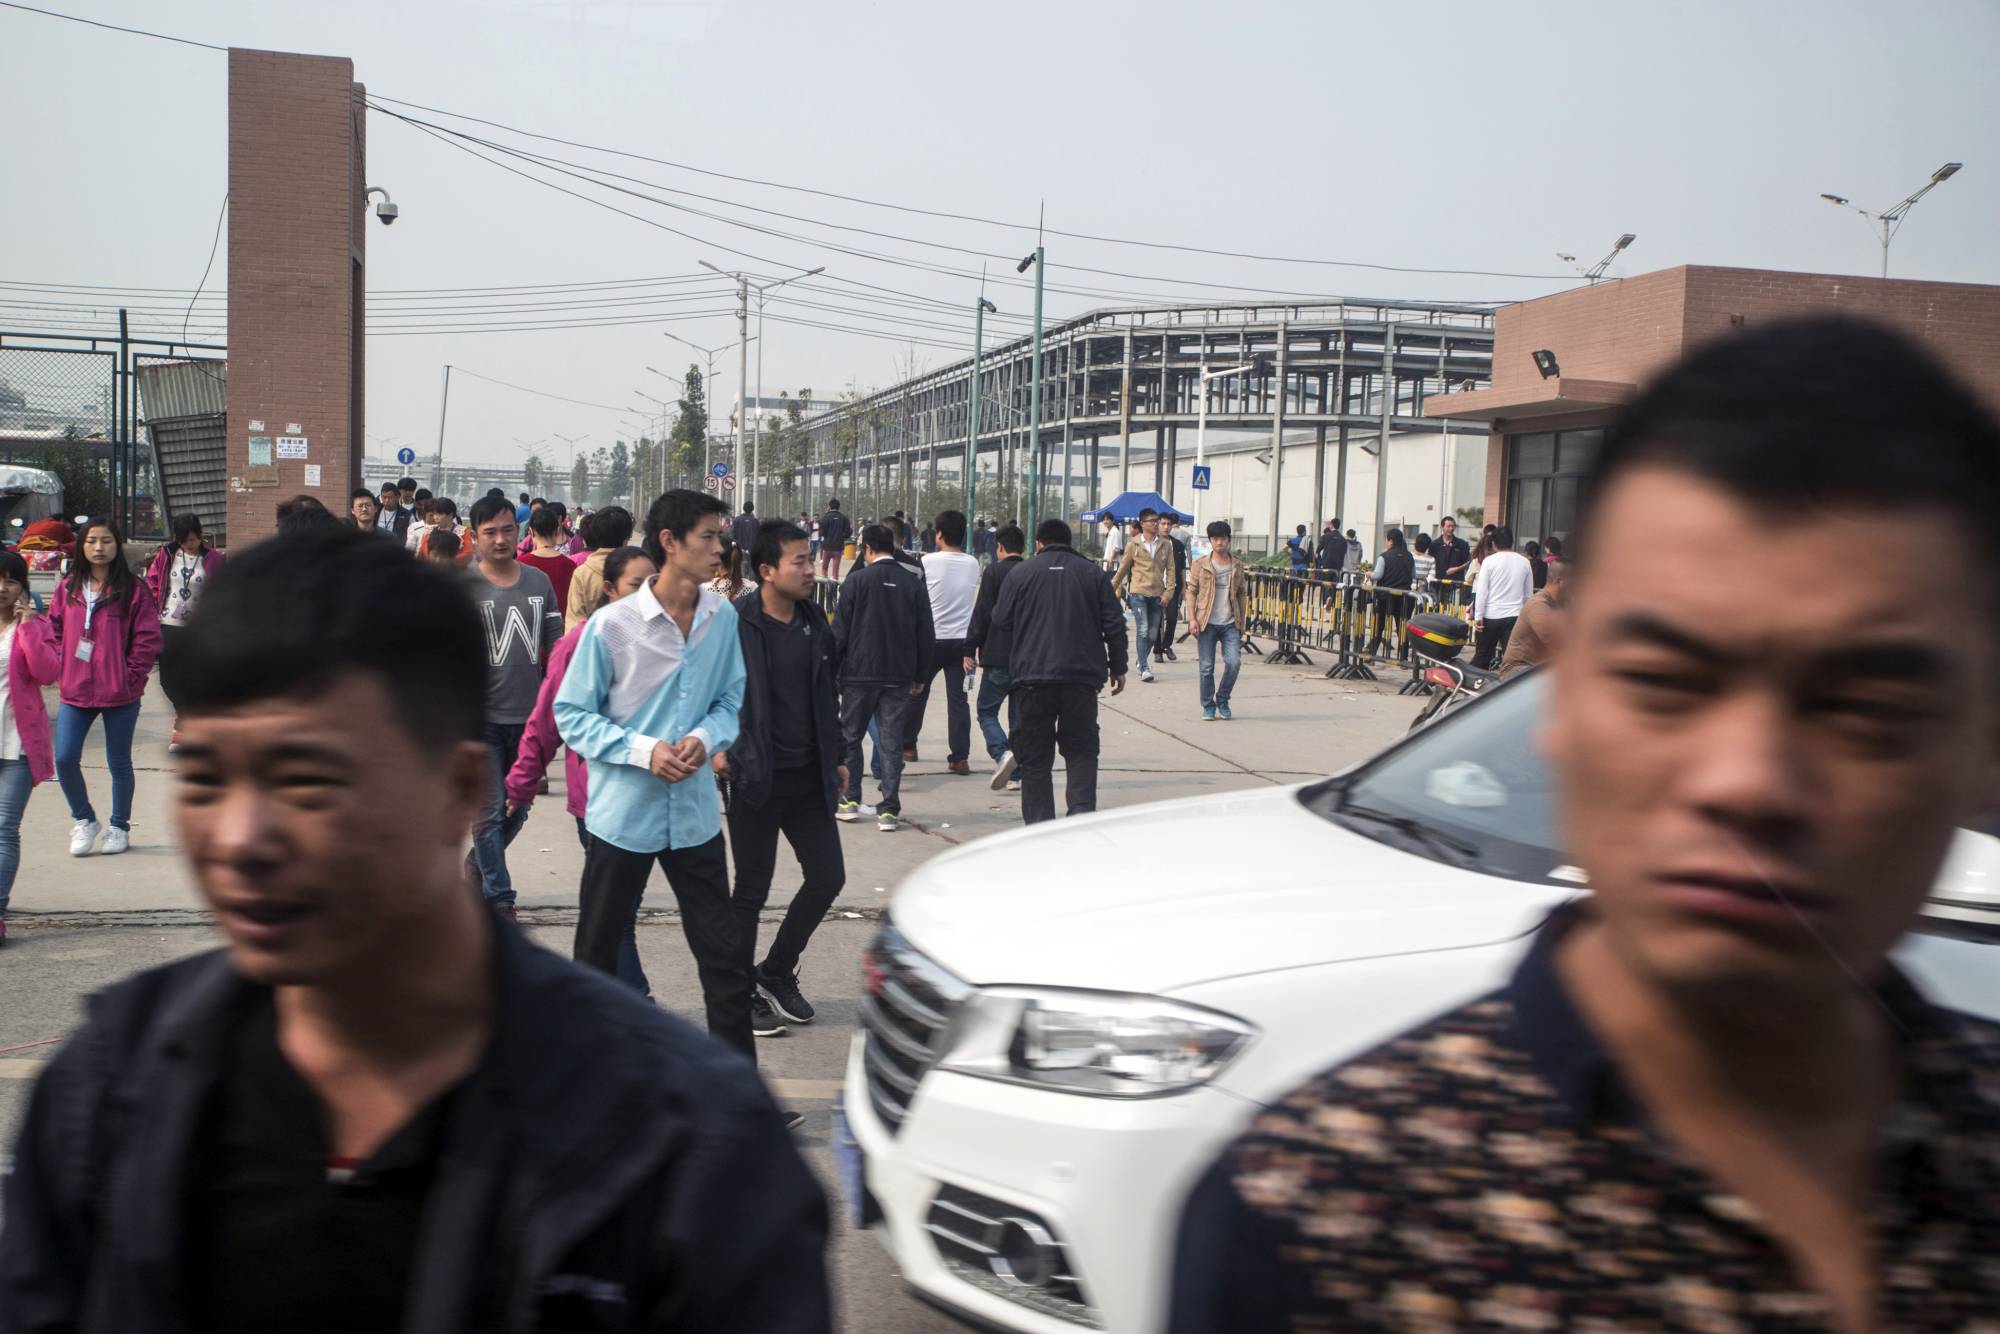 workers leave china's biggest iphone plant to escape covid-19 curbs | the japan times